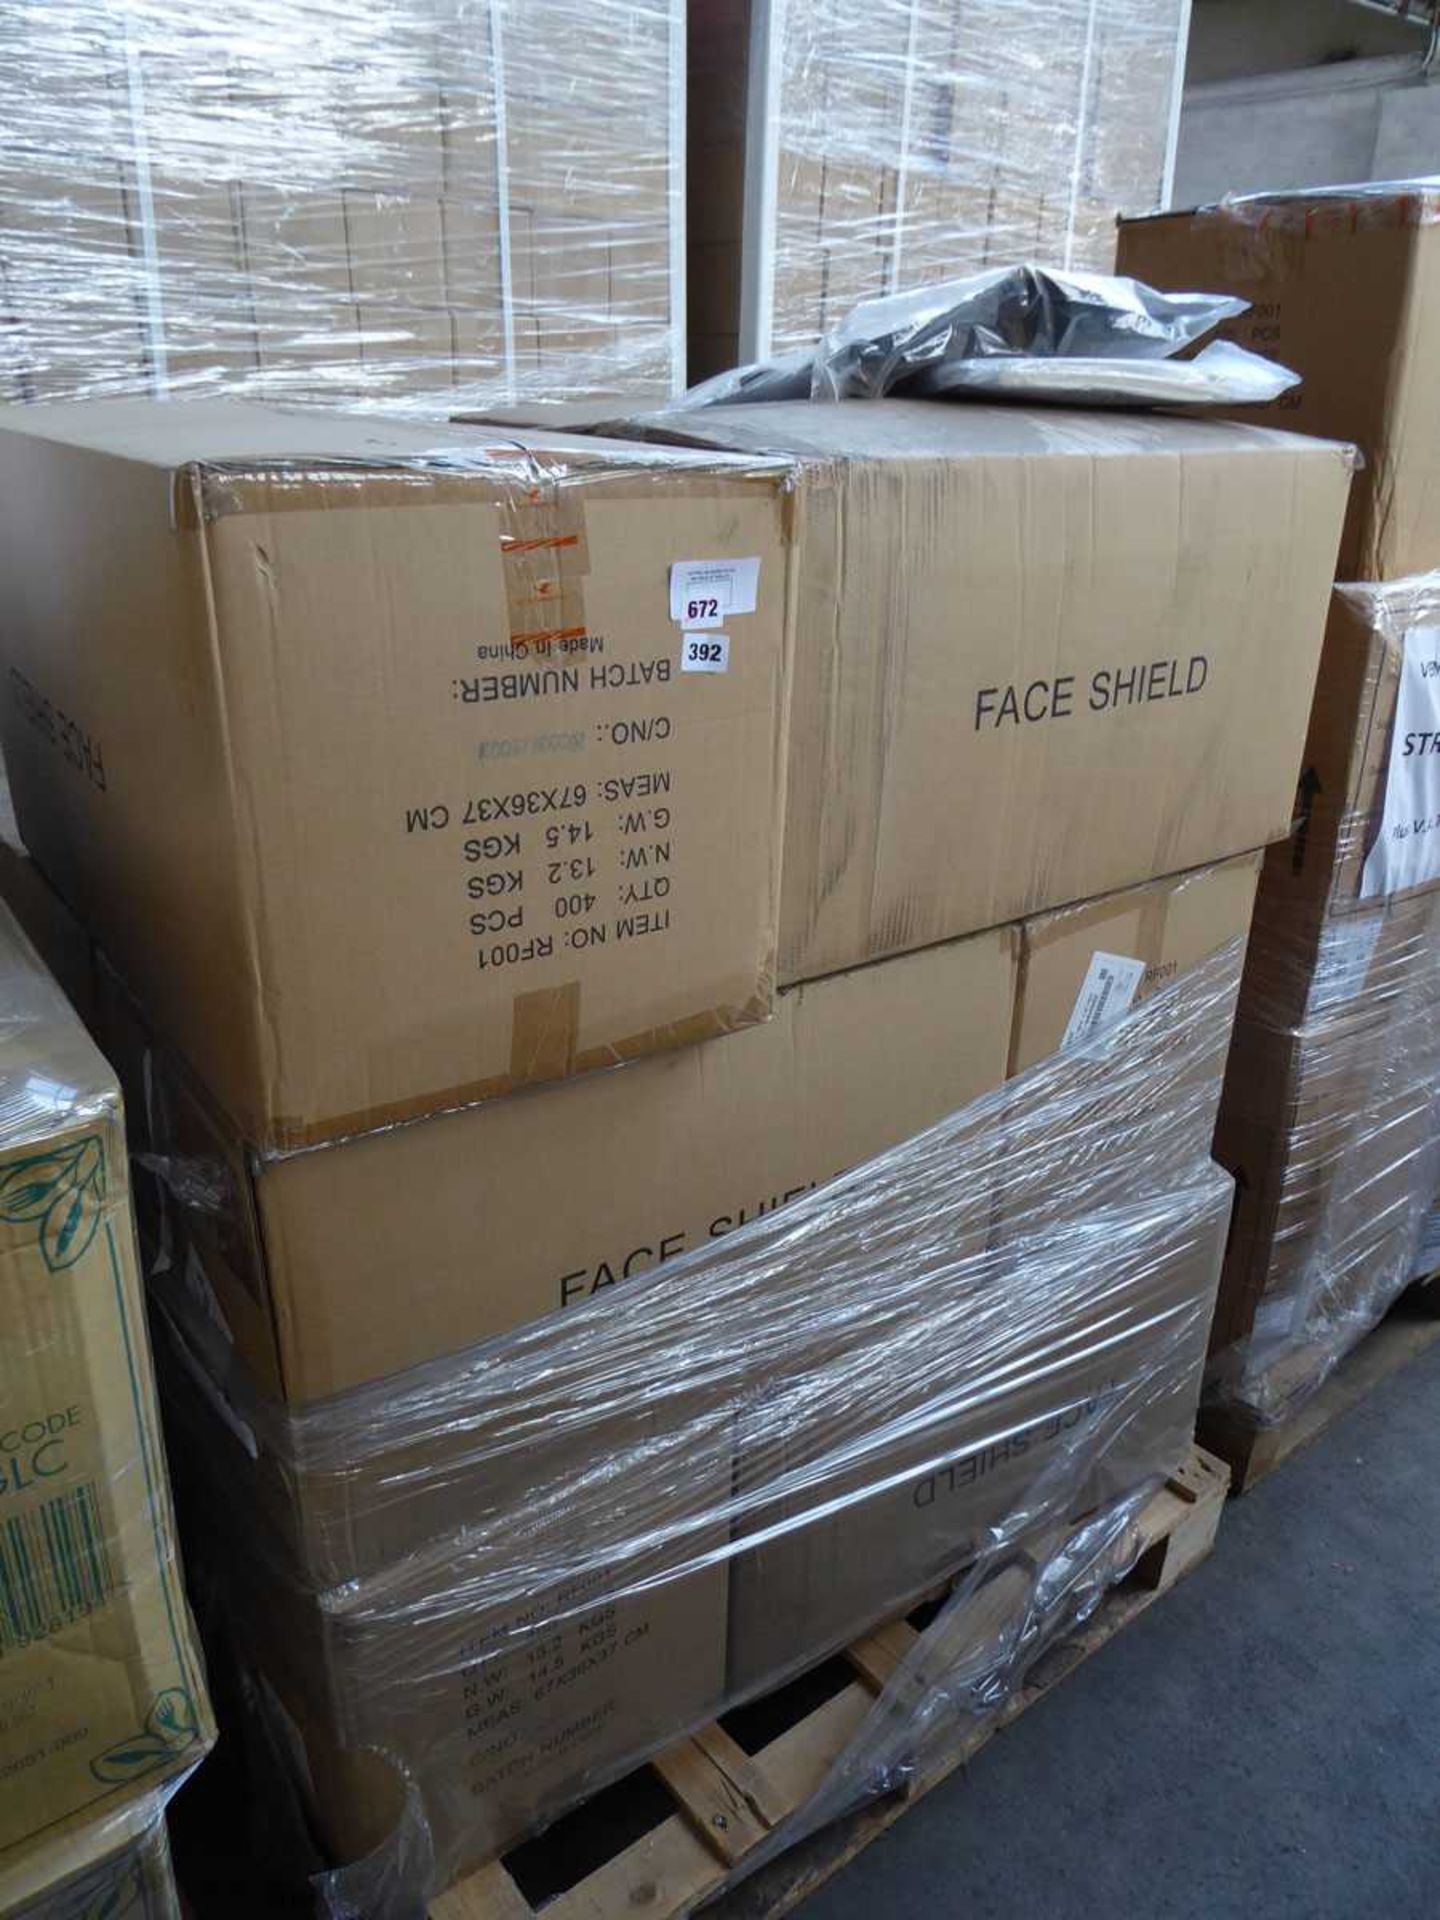 Pallet of face shields - Image 2 of 3